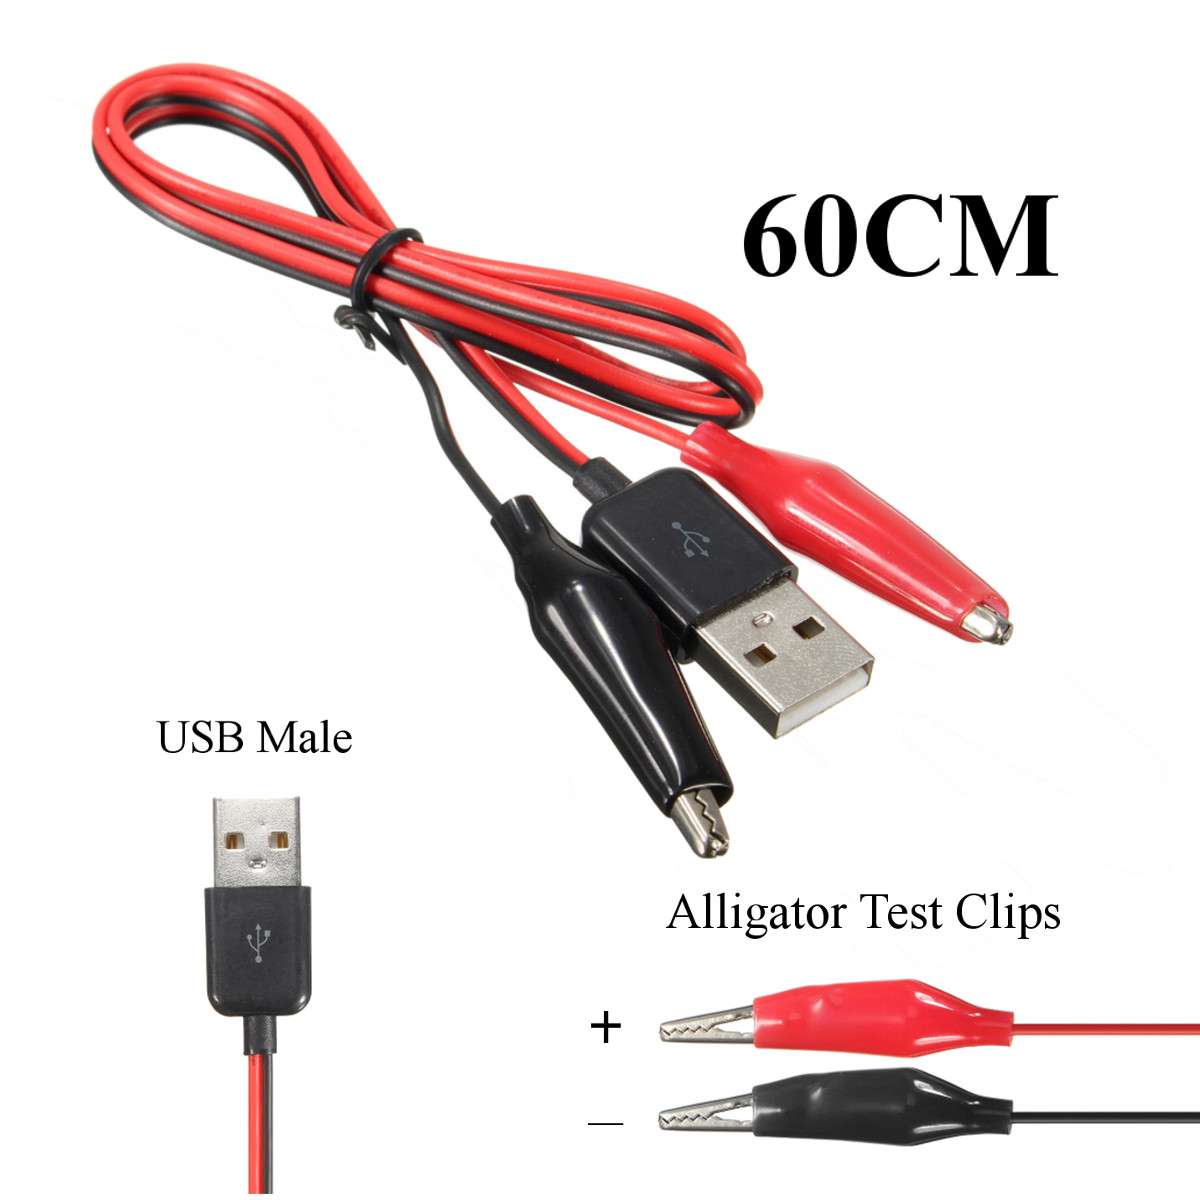 DANIU-60CM-Alligator-Test-Clips-Clamp-to-USB-Male-Connector-Power-Adapter-Cable-Wire-1157673-1